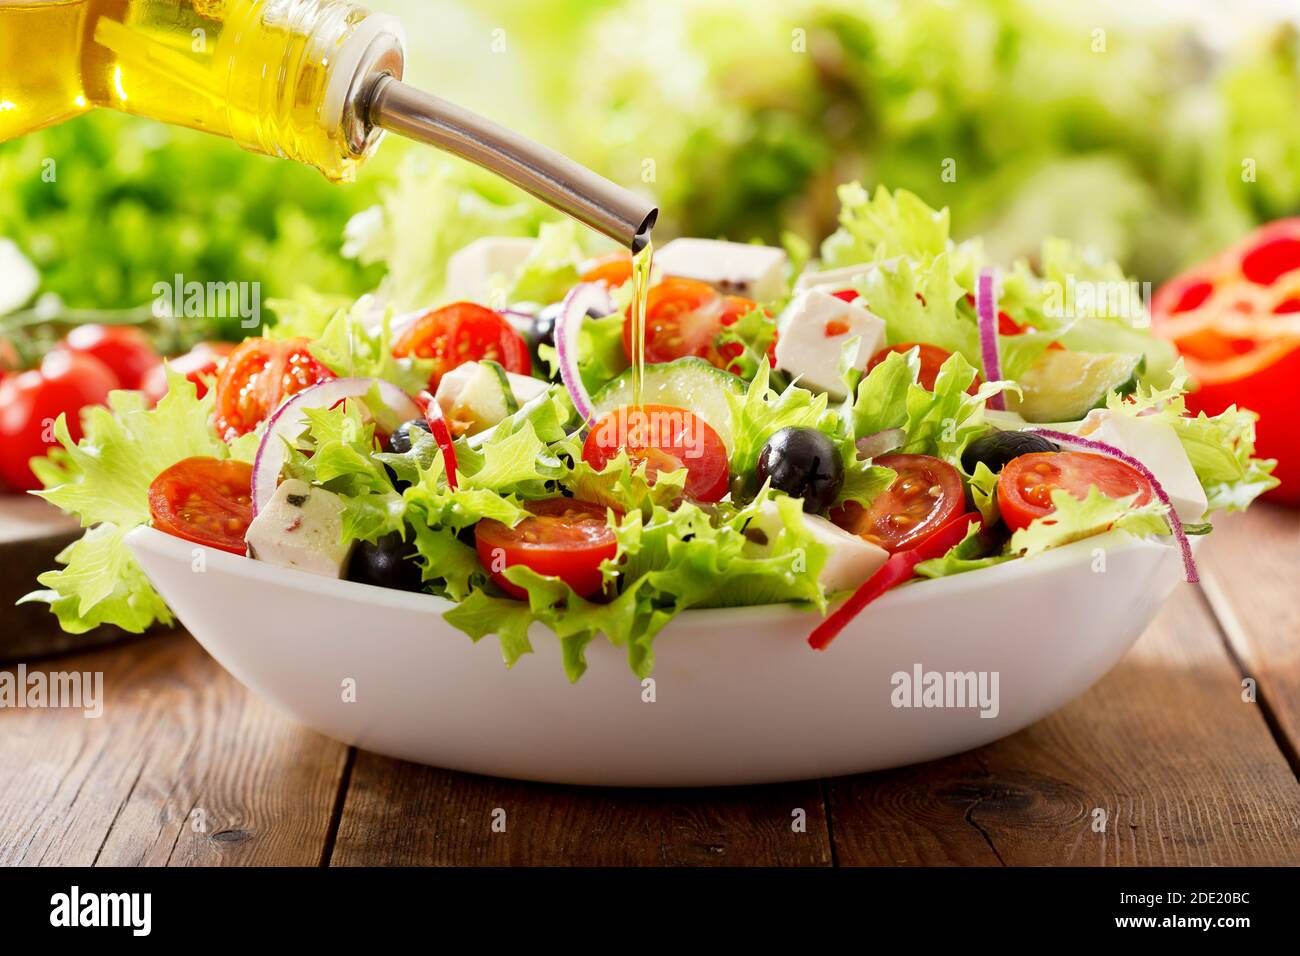 Cooking salad. olive oil pouring into bowl of fresh vegetable salad Stock Photo